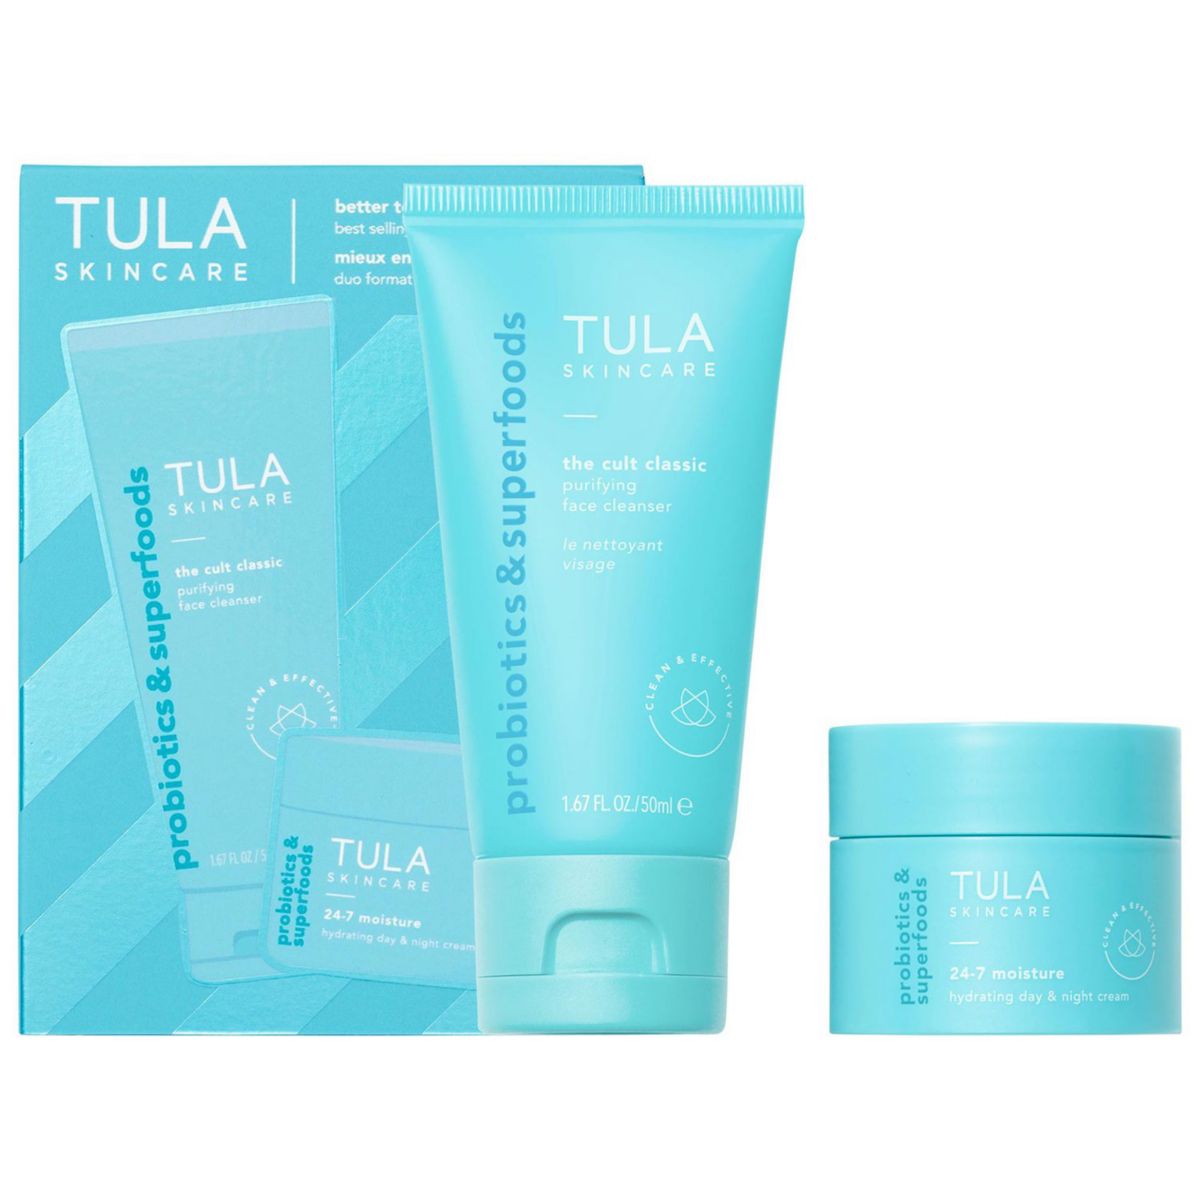 TULA Skincare Better Together Bestselling Cleansing & Hydrating Duo TULA Skincare